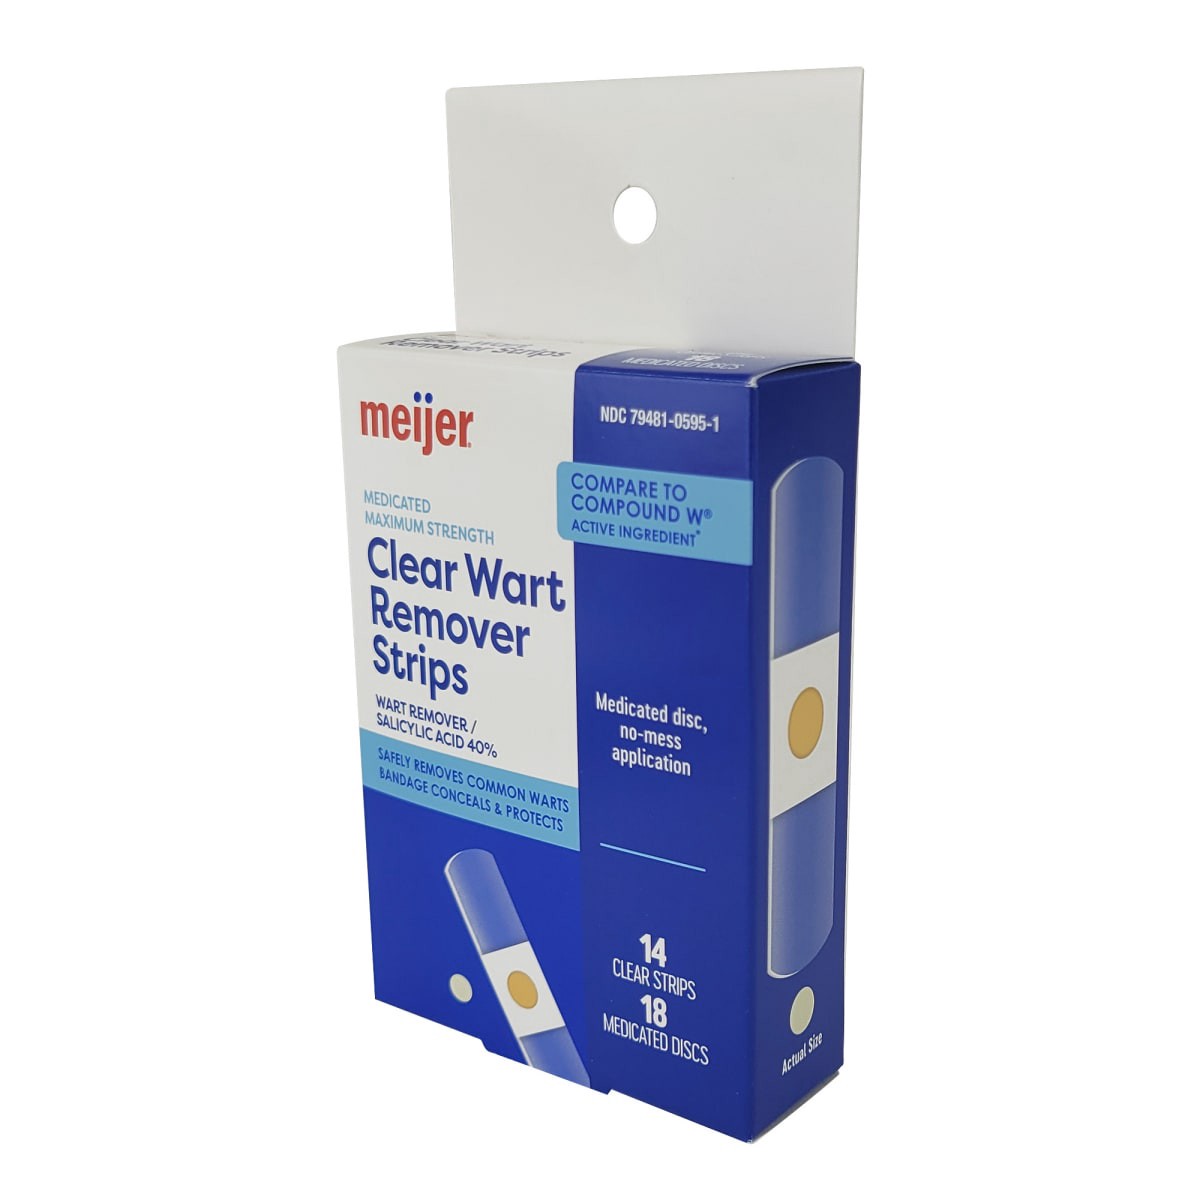 slide 5 of 17, Meijer Premier Two Step Clear Wart Remover Strips, 14 ct